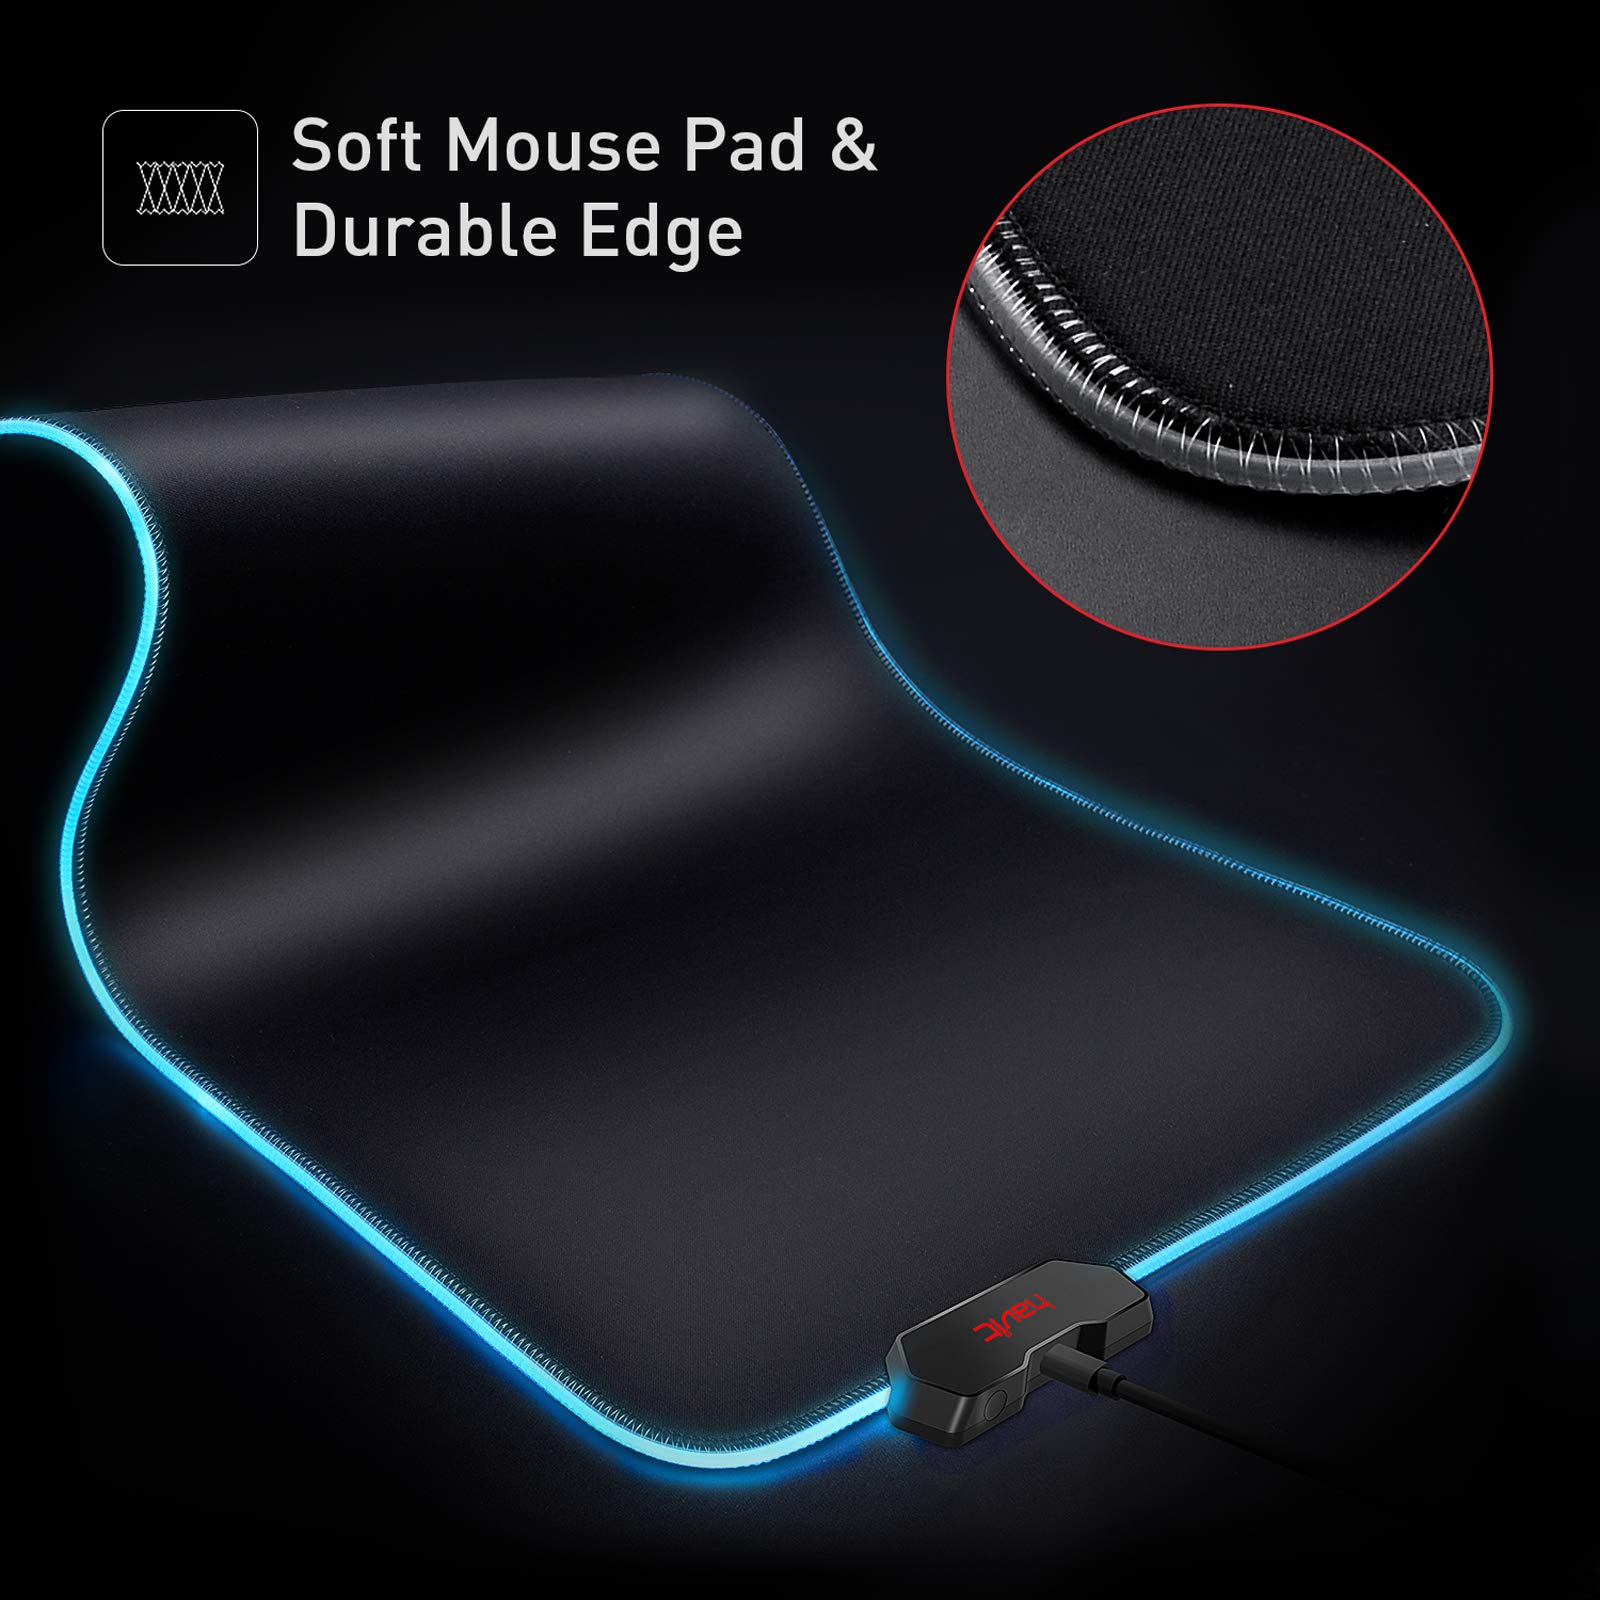 havit RGB Gaming Mouse Pad Soft Non-Slip Rubber Base Mouse Mat for Laptop Computer PC Games (27.5 X 11.2 X 0.11 inches, Black)